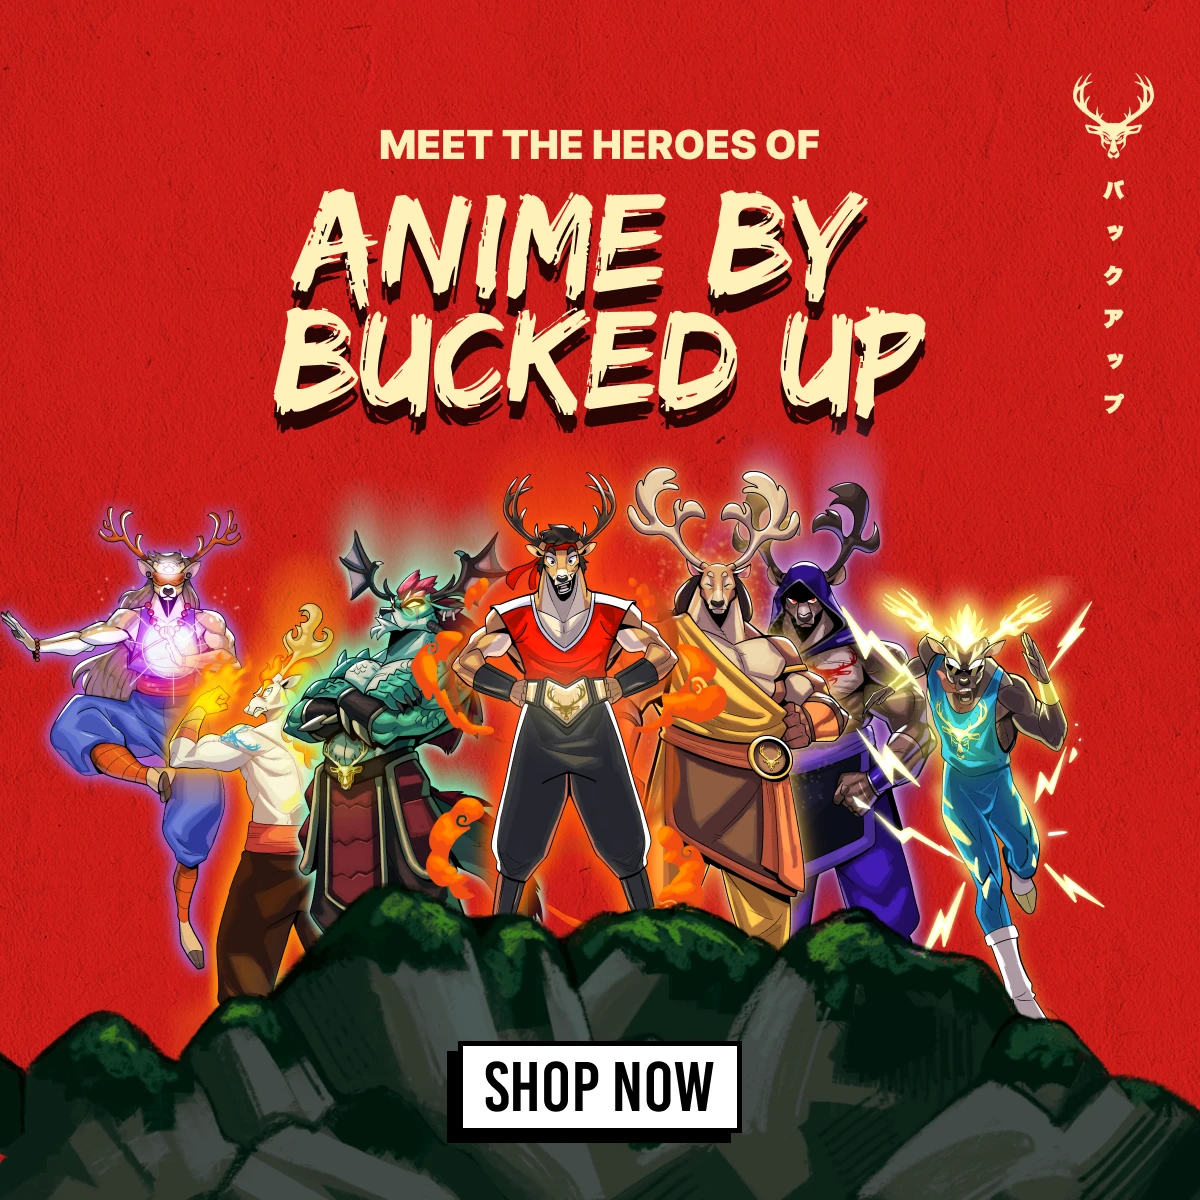 Bucked Up Anime 1 - Text says "meet the heroes of anime by bucked up", button says "shop now", with a buck logo and Japanese characters in the top right corner.  Image is of seven deer characters standing on a hill, each representing v